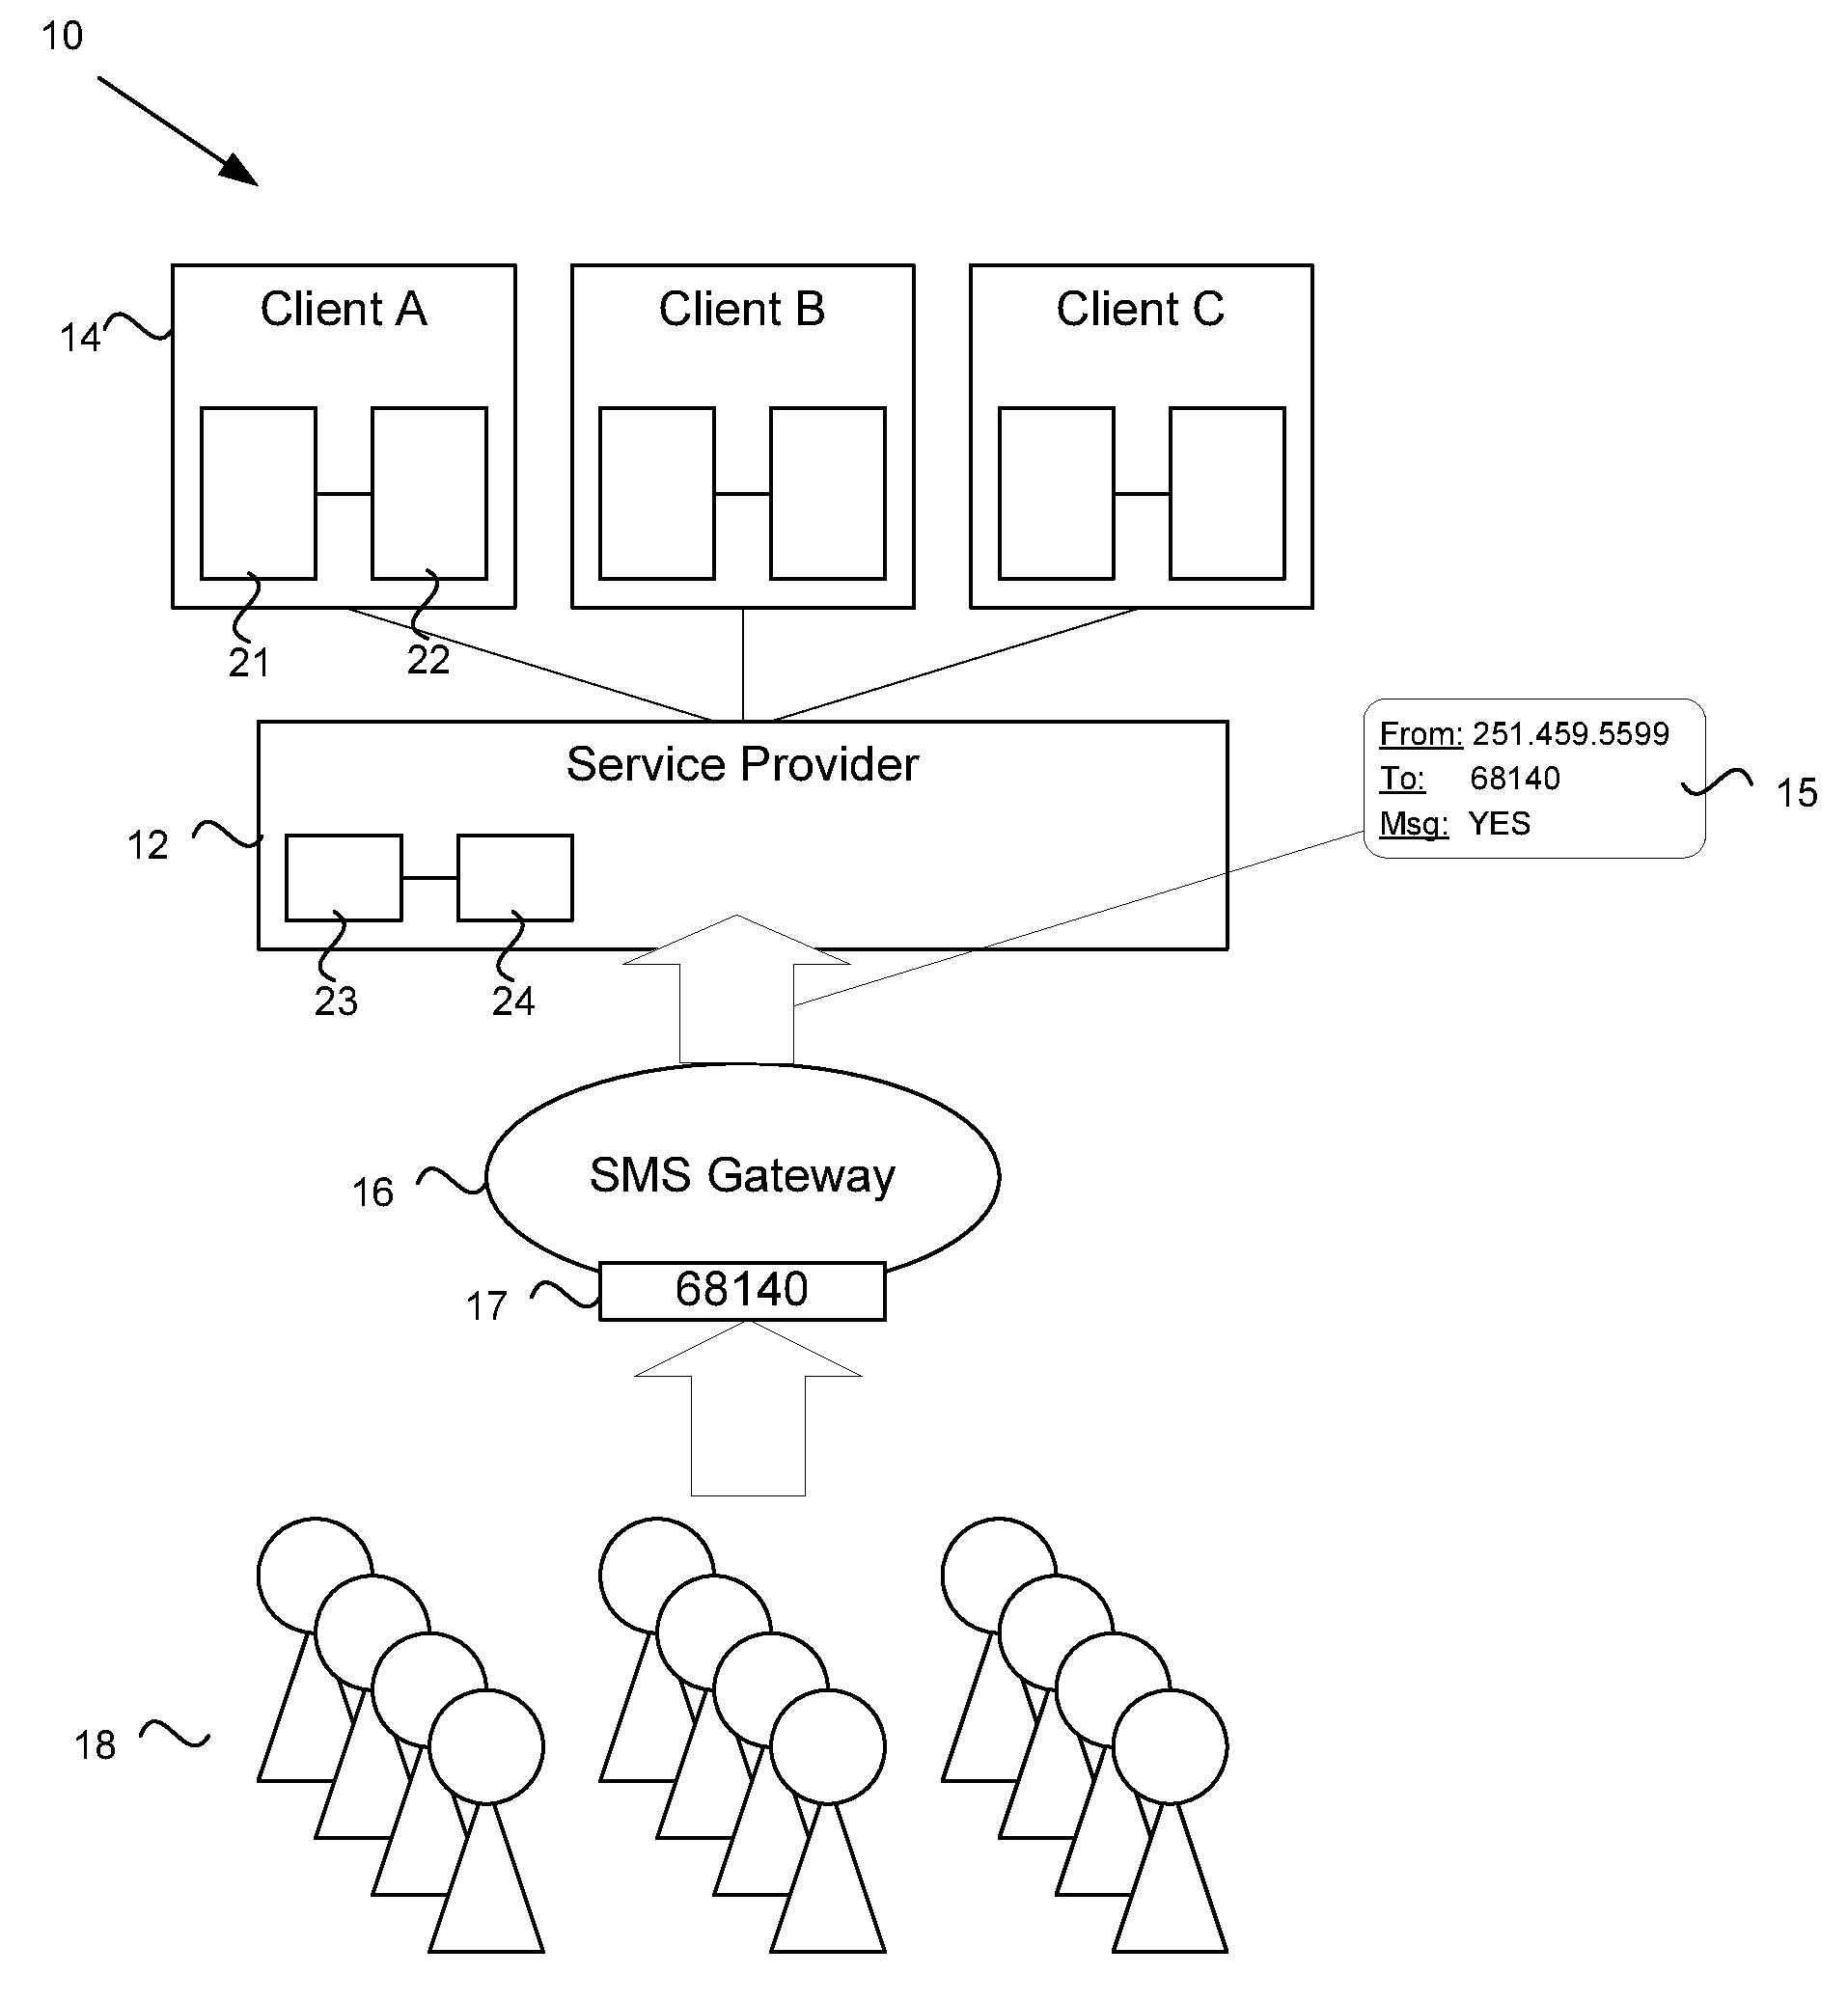 System and method for providing SMS message services from multiple originators using a shared shortcode